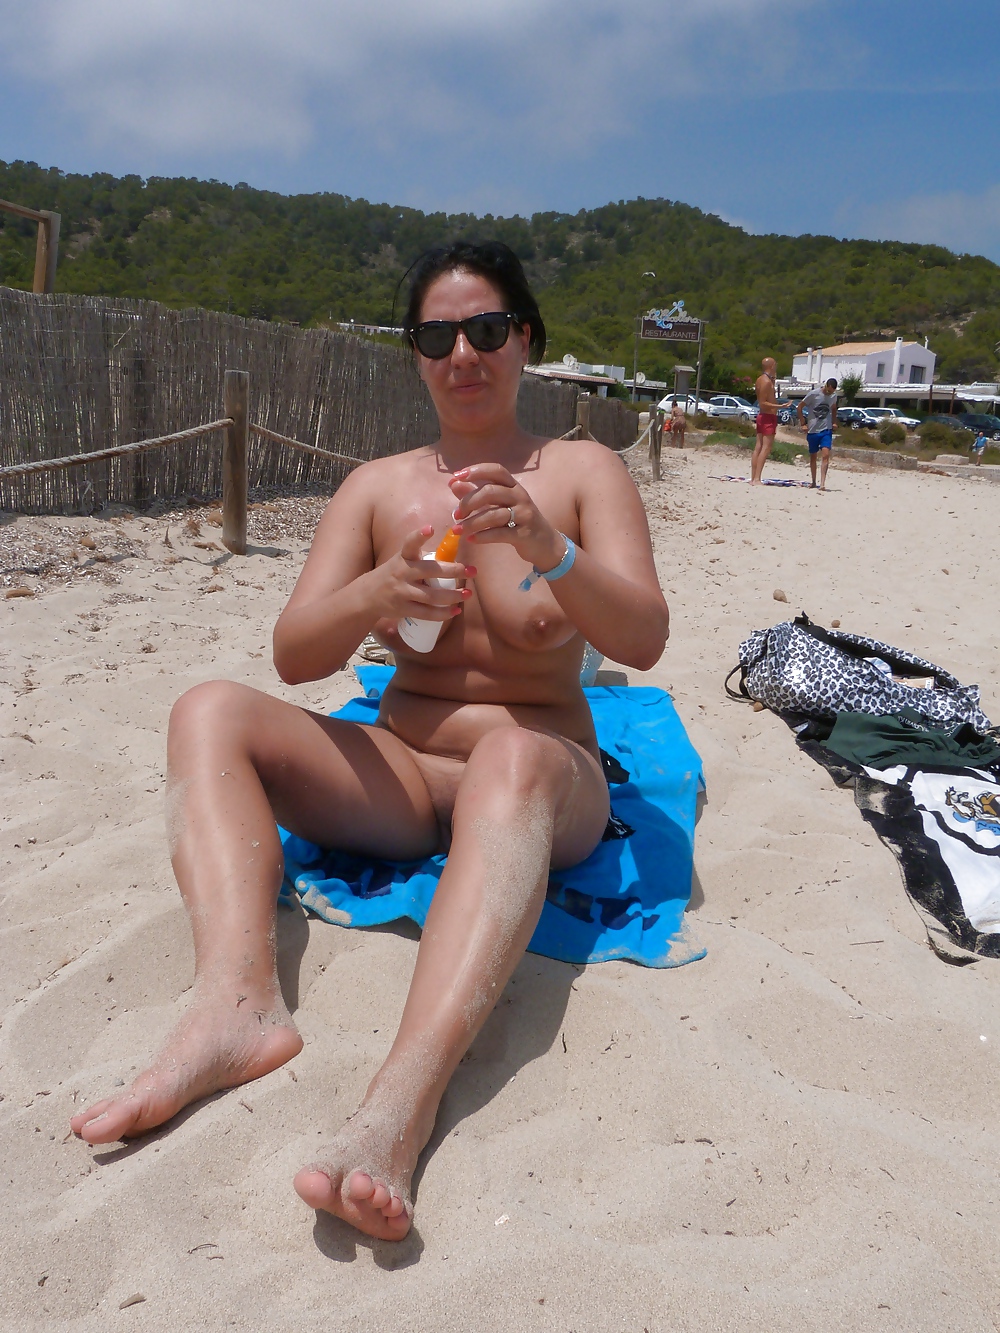 Me naked at the nudist beach #15466573